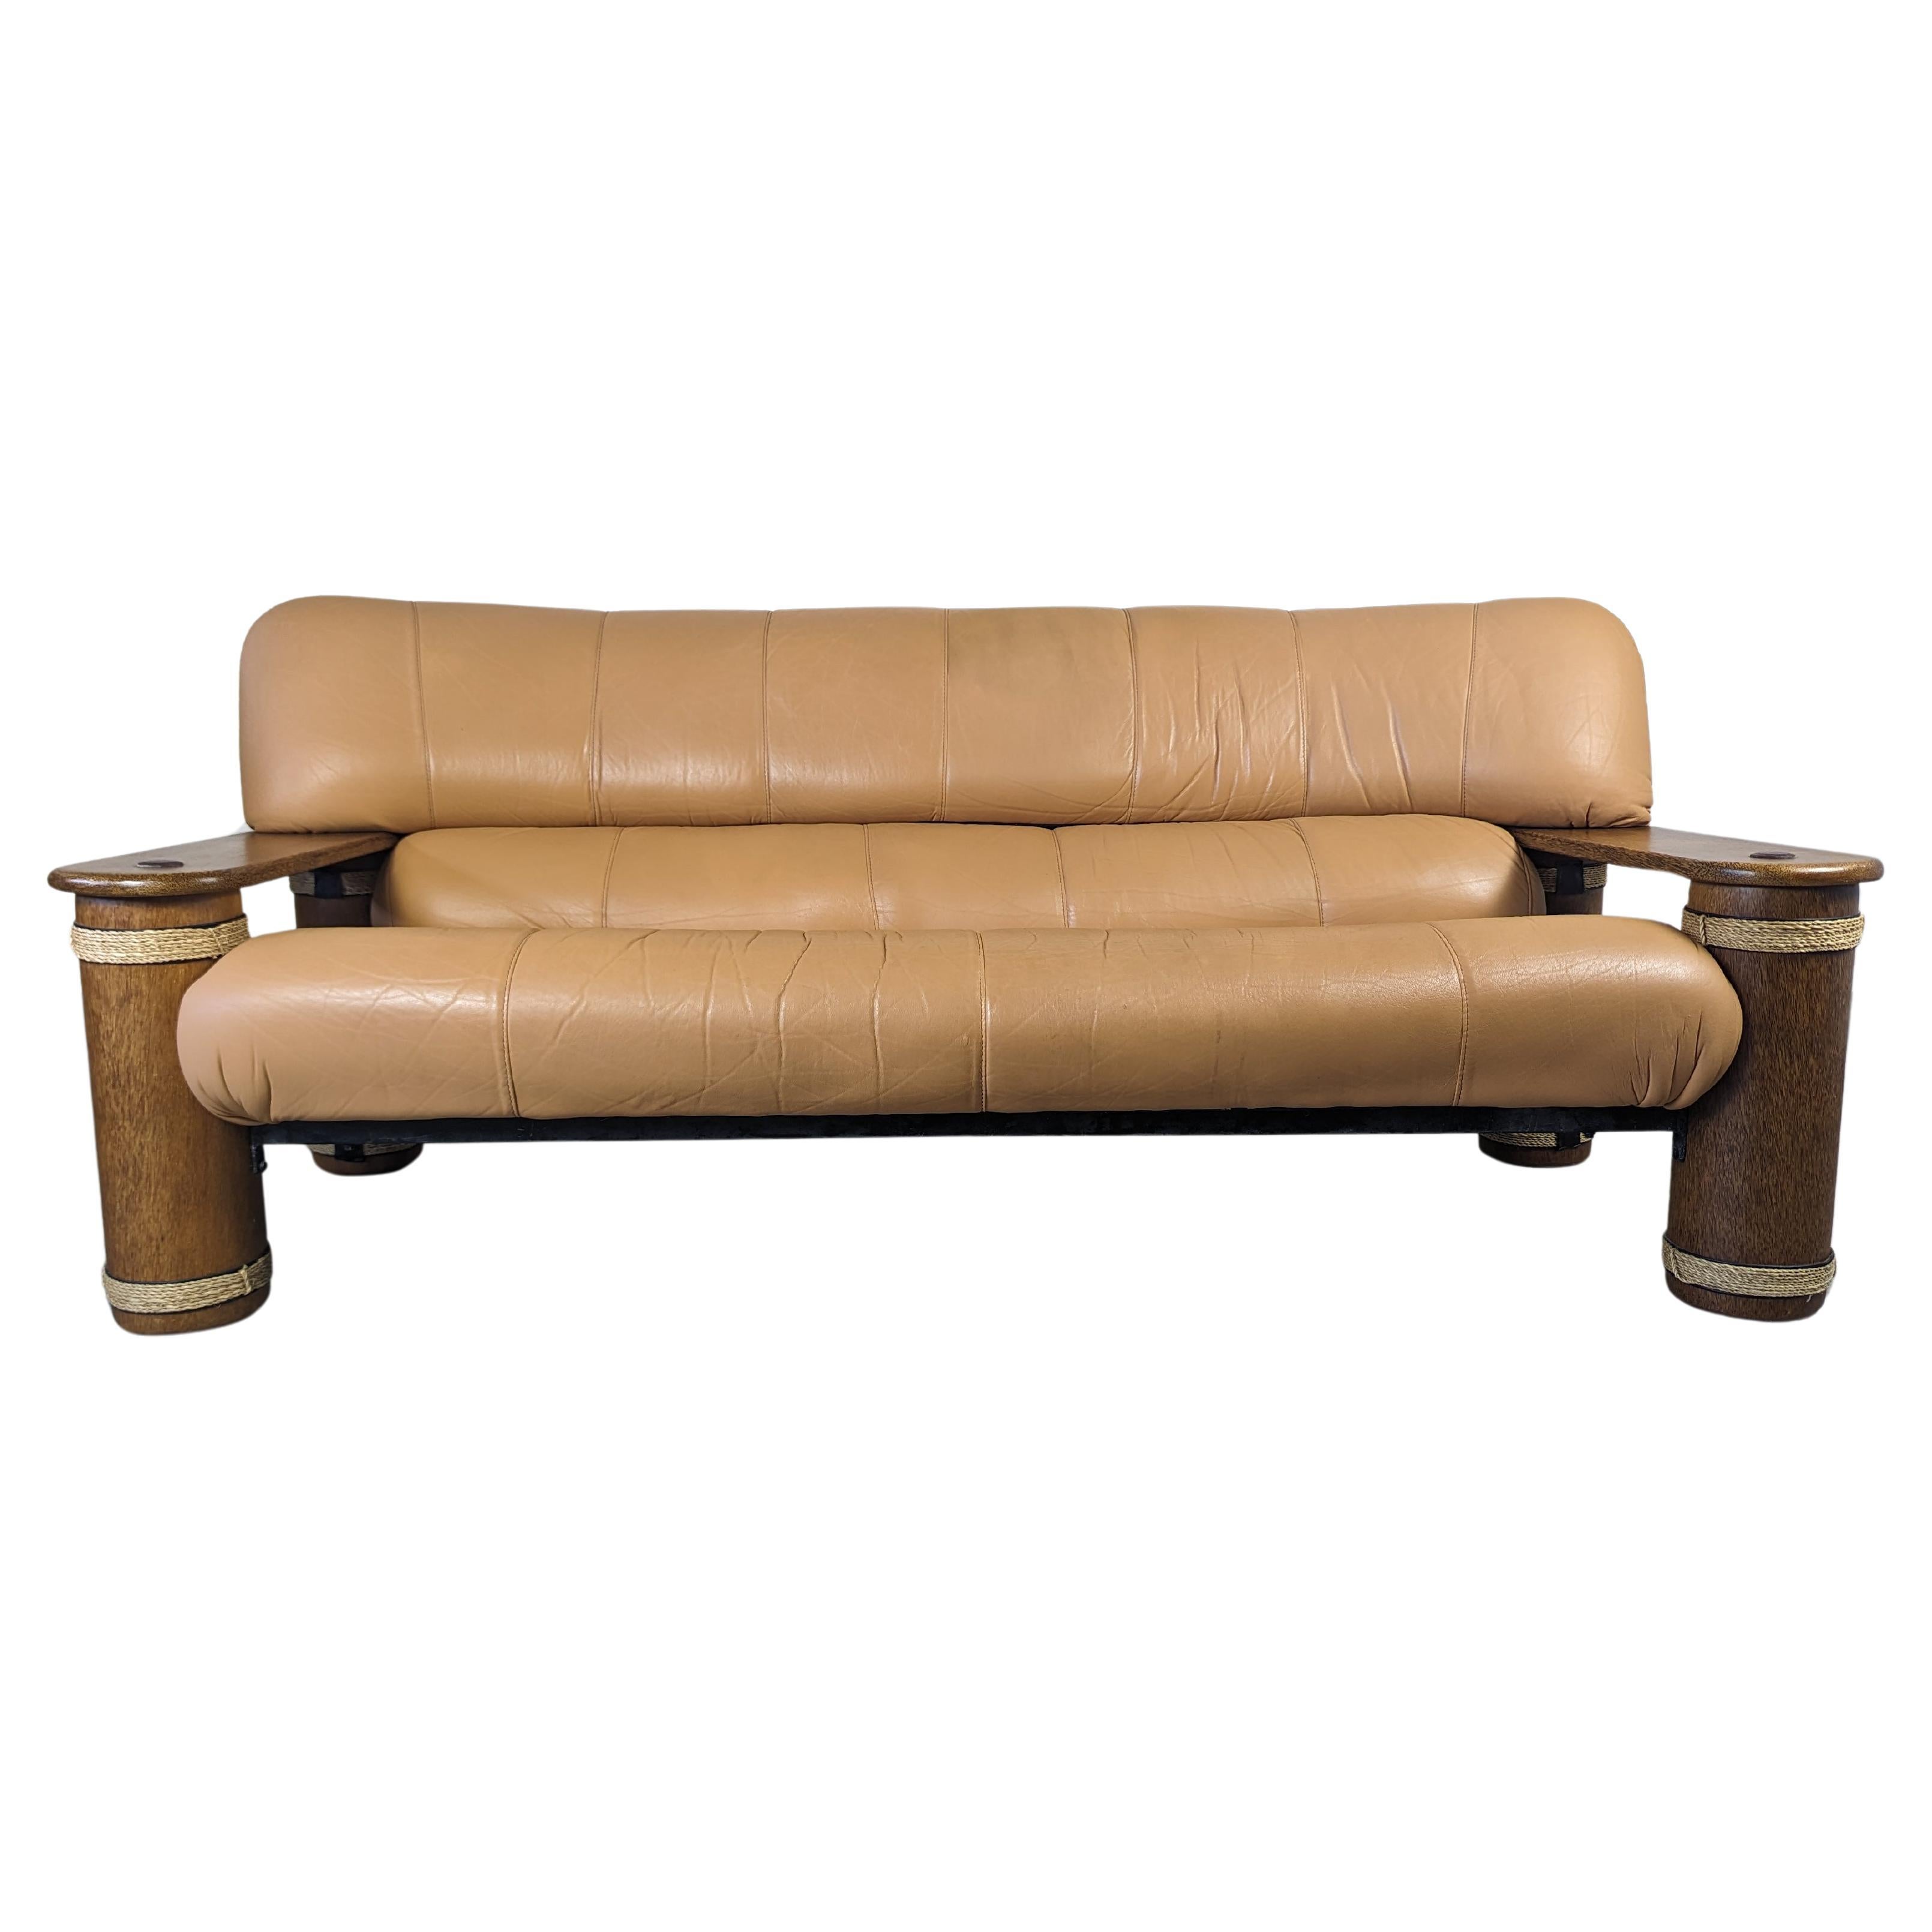 Vintage Leather and Palmwood Three-Seat Sofa by Pacific Green, c1990s